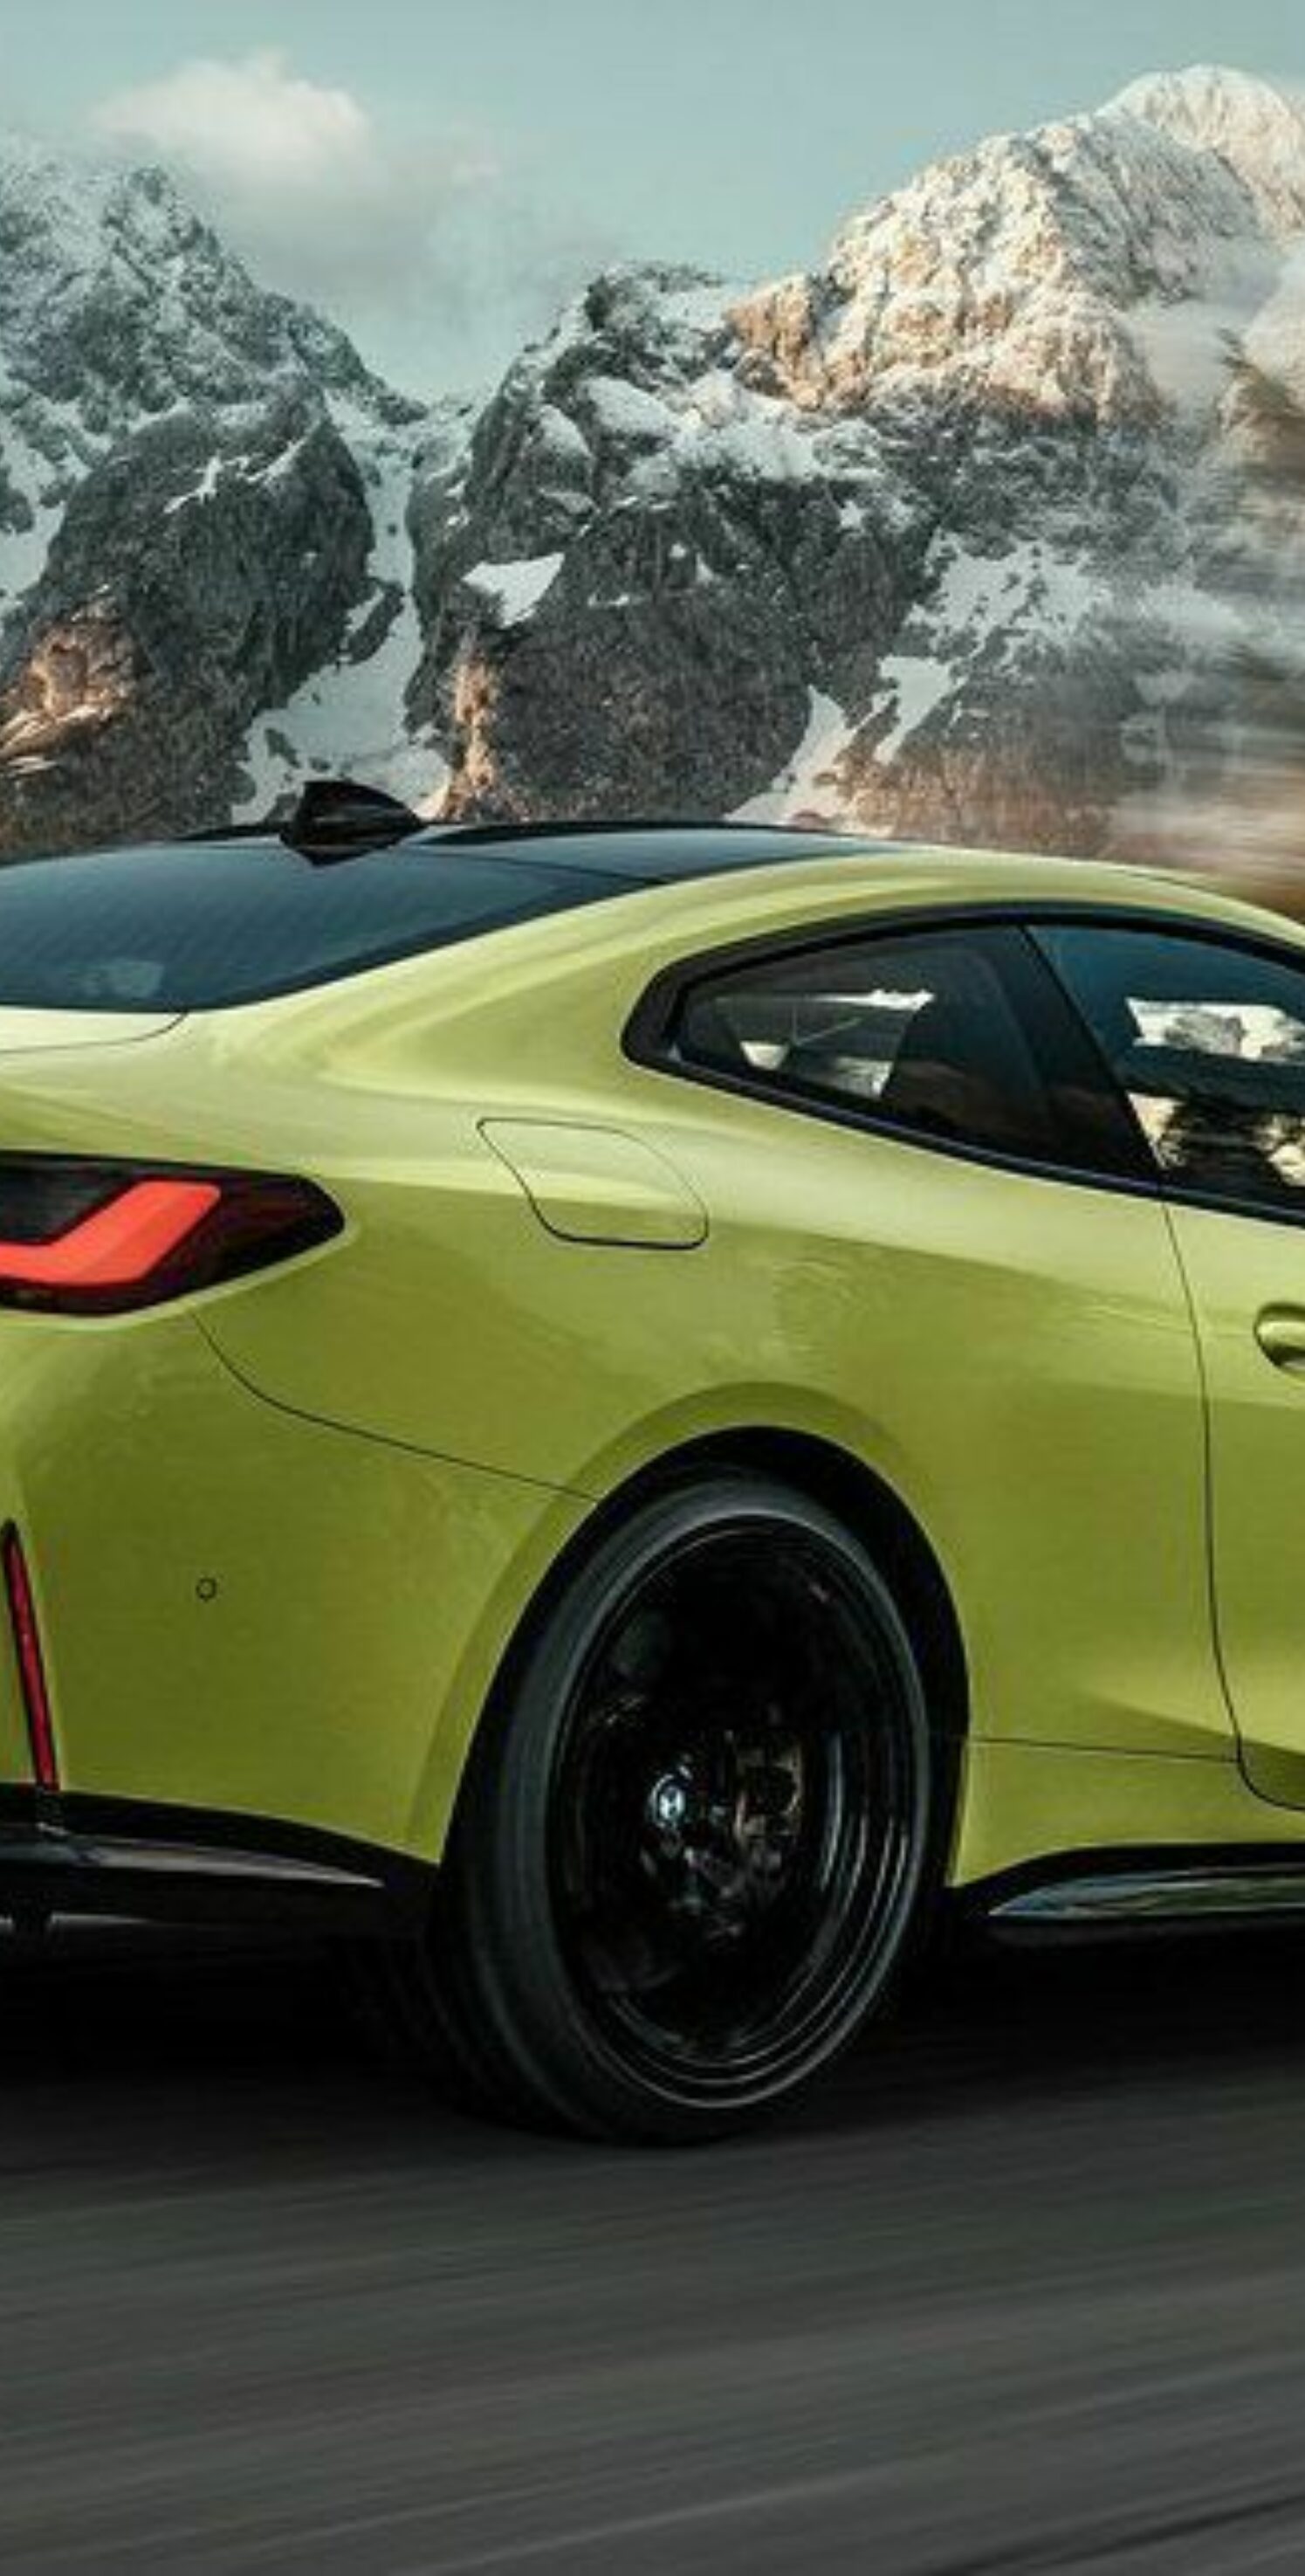 https://autofilter.sk/assets/images/rad-4-coupe-2/gallery/bmw-m4-coupe-competition-2021_15-galeria.jpg - obrazok